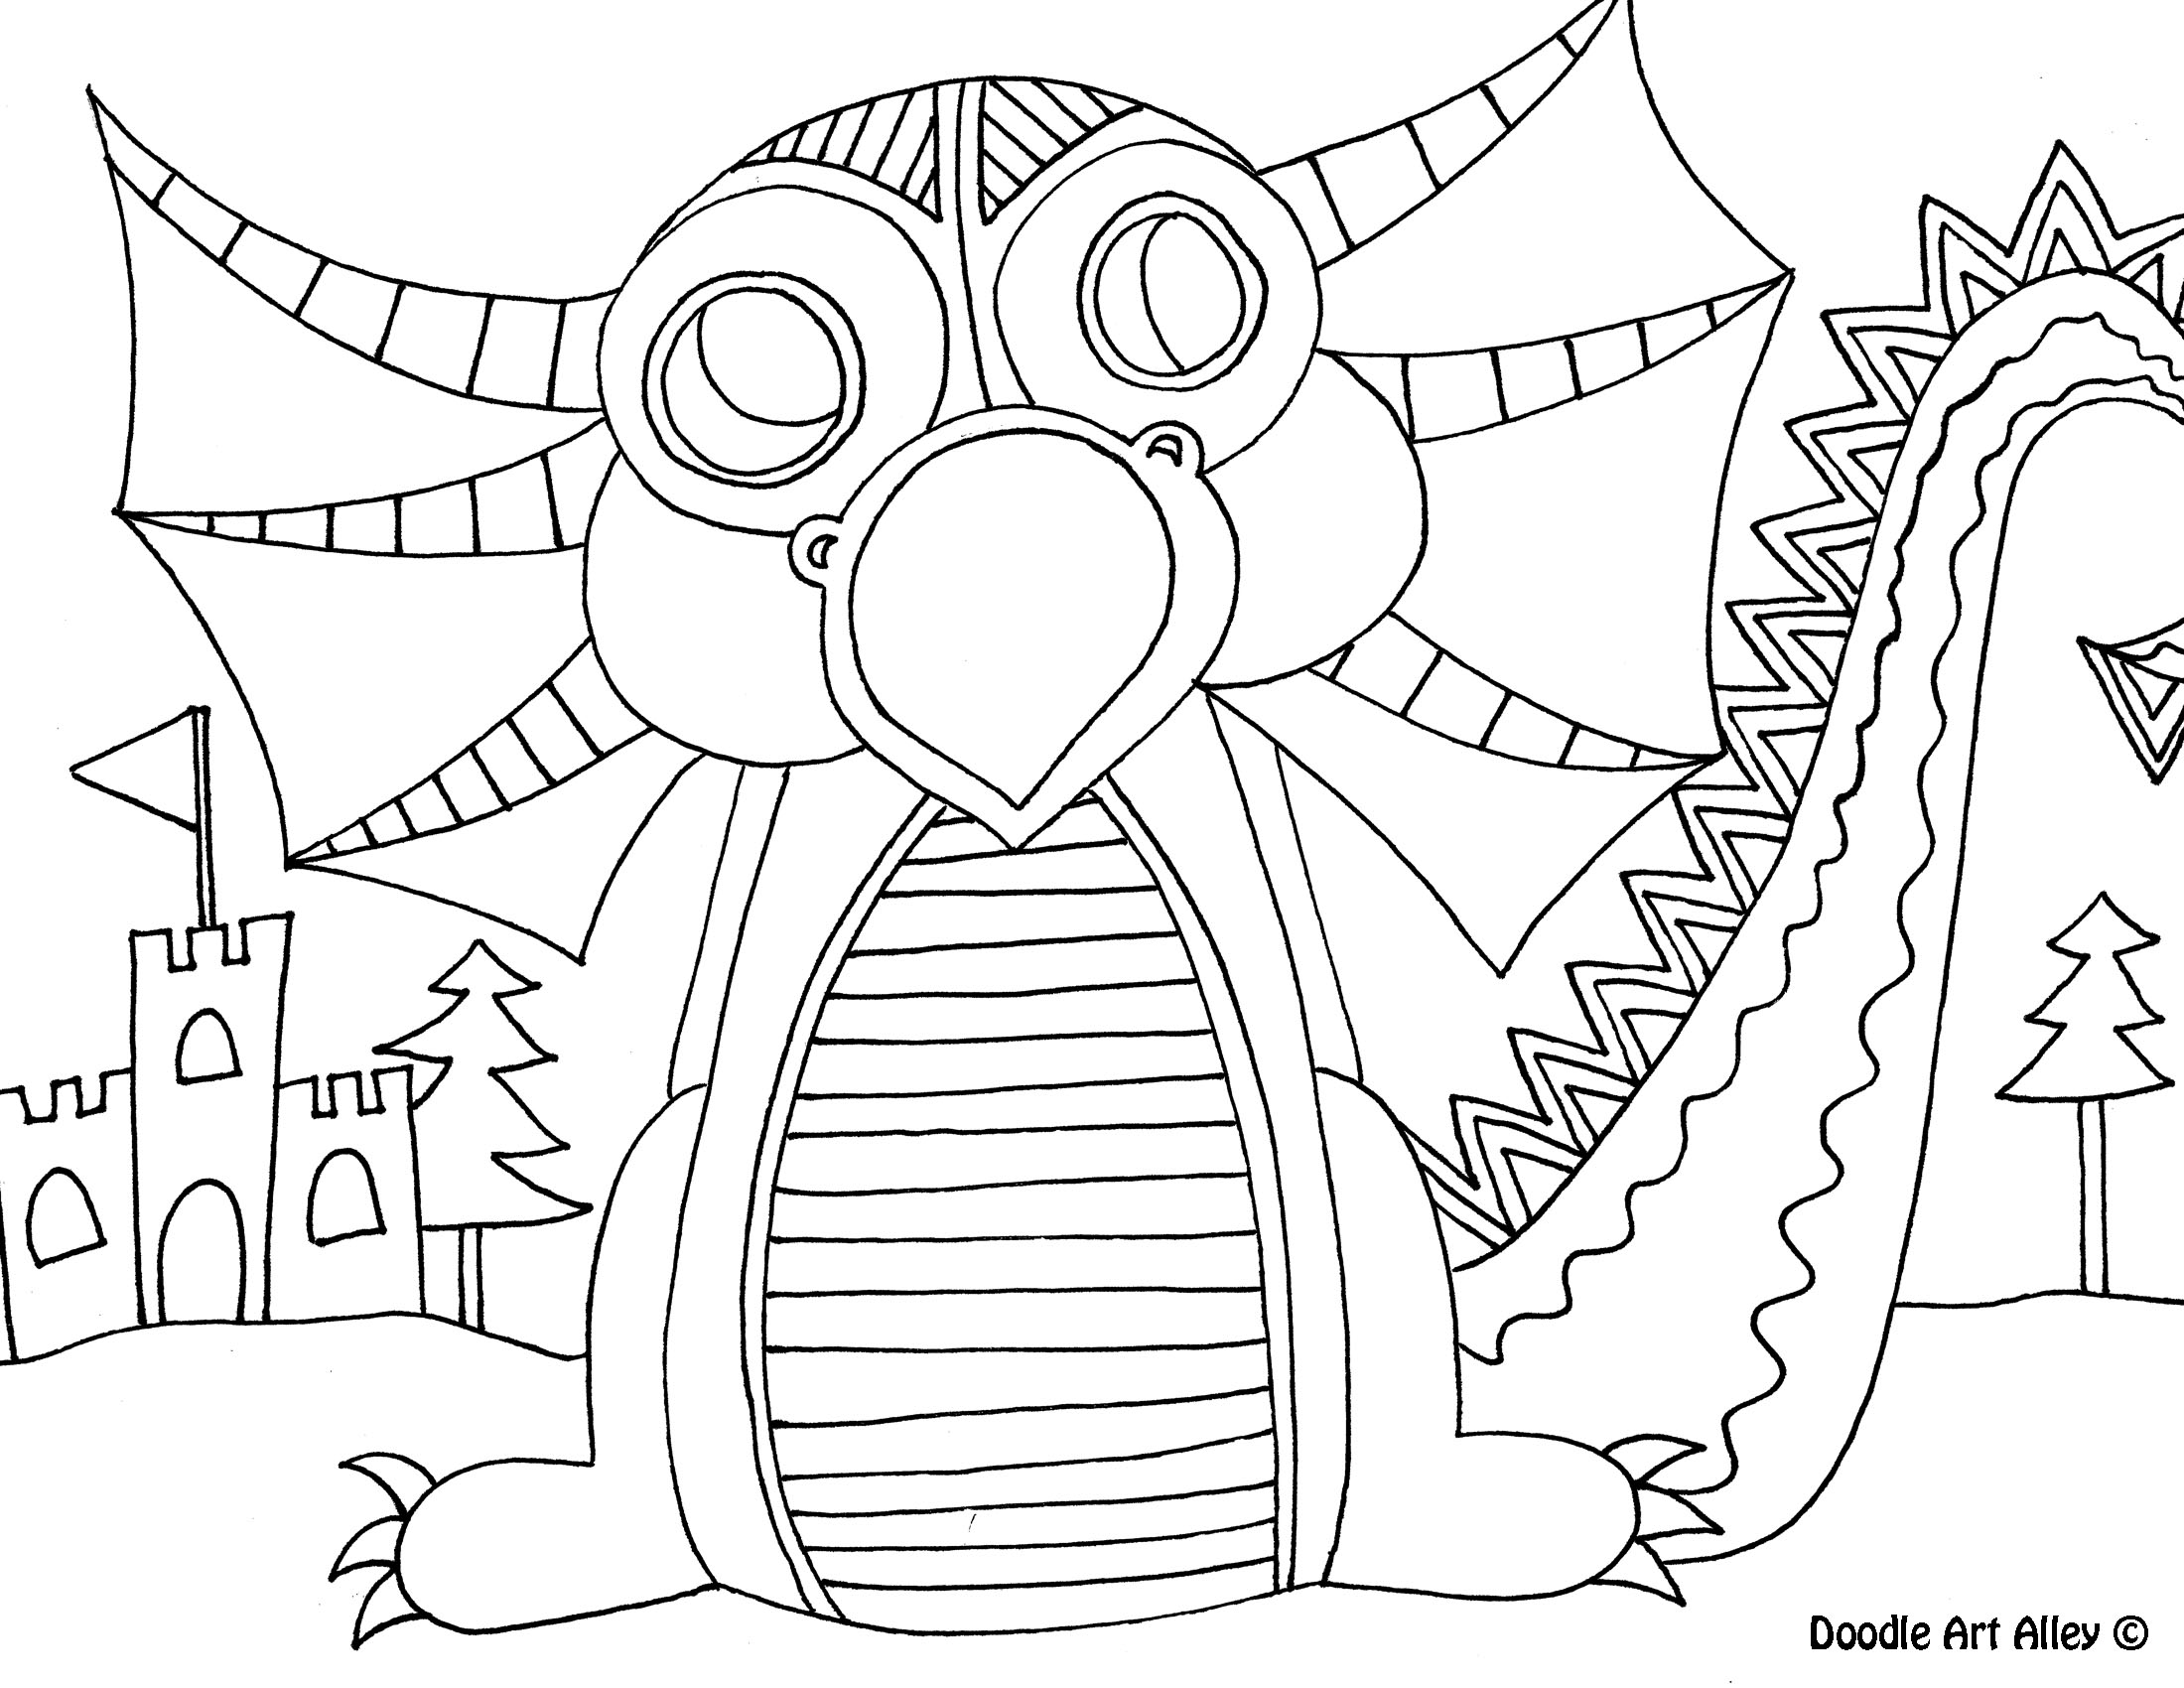 Mythical Creatures Coloring pages - DOODLE ART ALLEY